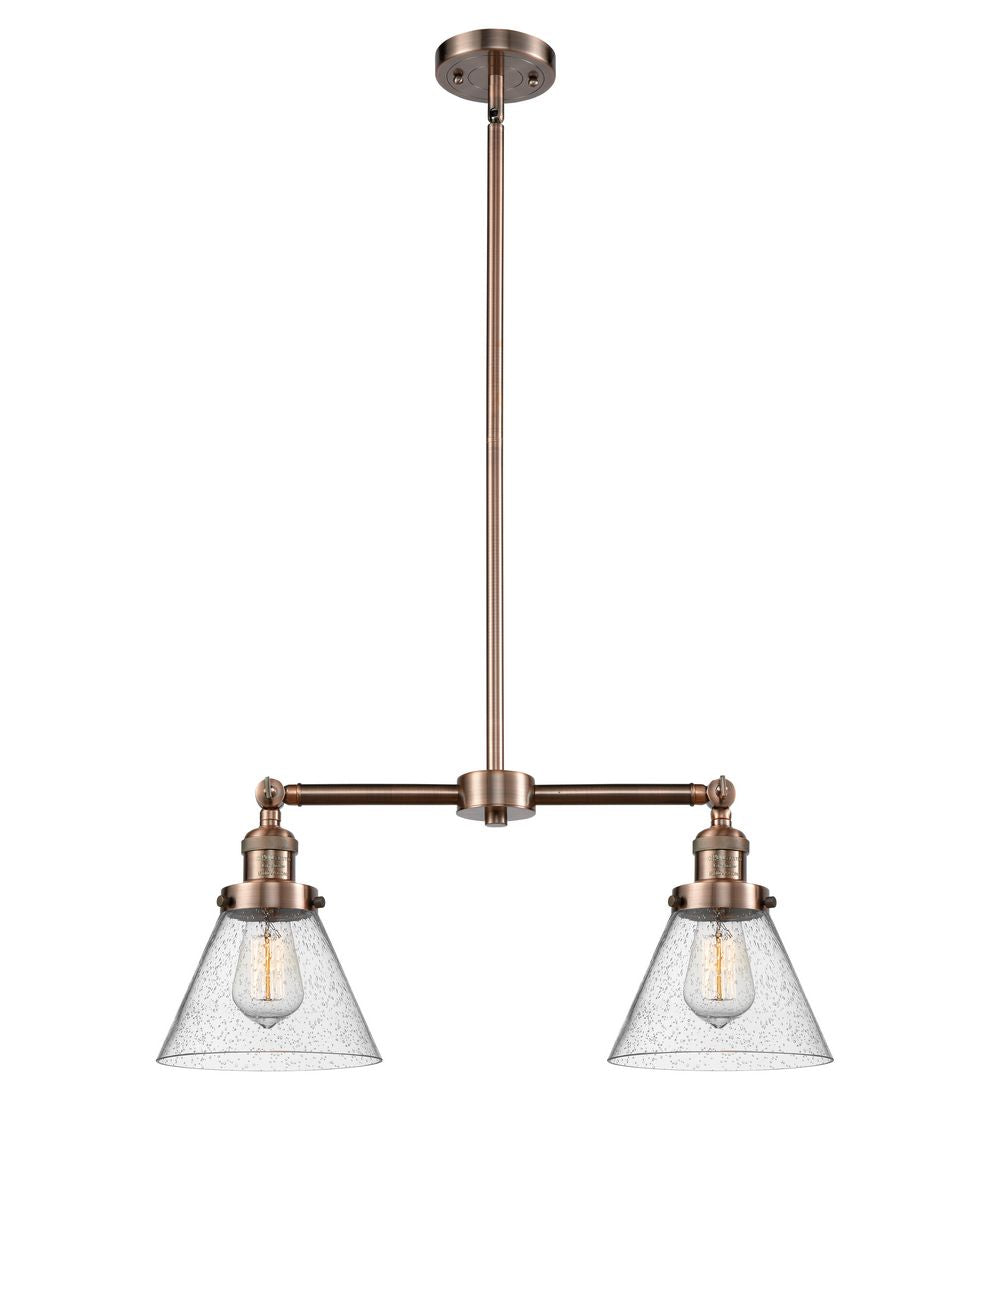 209-AC-G44 2-Light 21" Antique Copper Island Light - Seedy Large Cone Glass - LED Bulb - Dimmensions: 21 x 5 x 10<br>Minimum Height : 21.125<br>Maximum Height : 45.125 - Sloped Ceiling Compatible: Yes